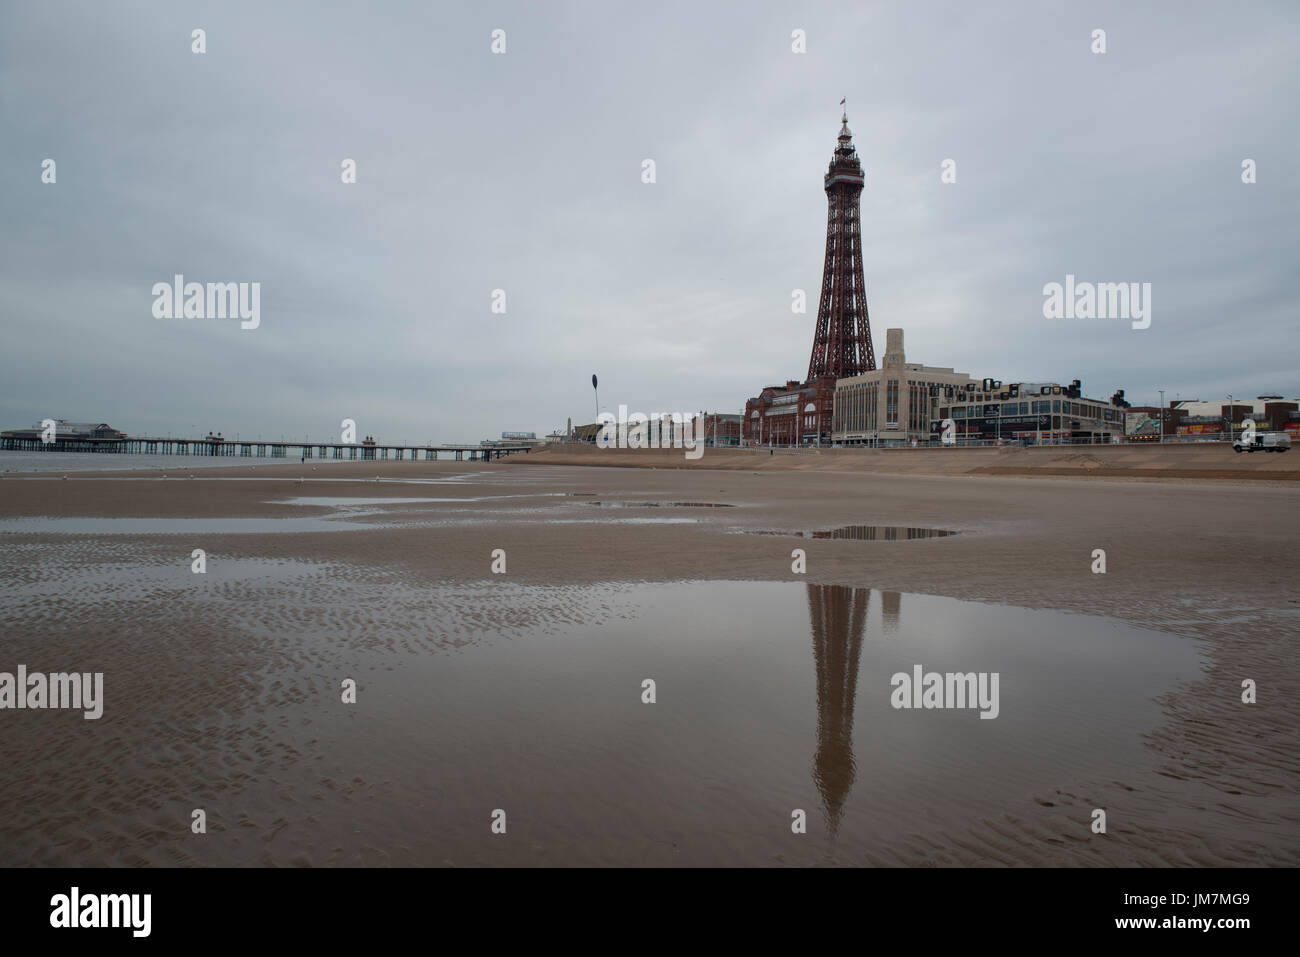 Blackpool tower, view from the beach. credit: LEE RAMSDEN / ALAMY Stock Photo